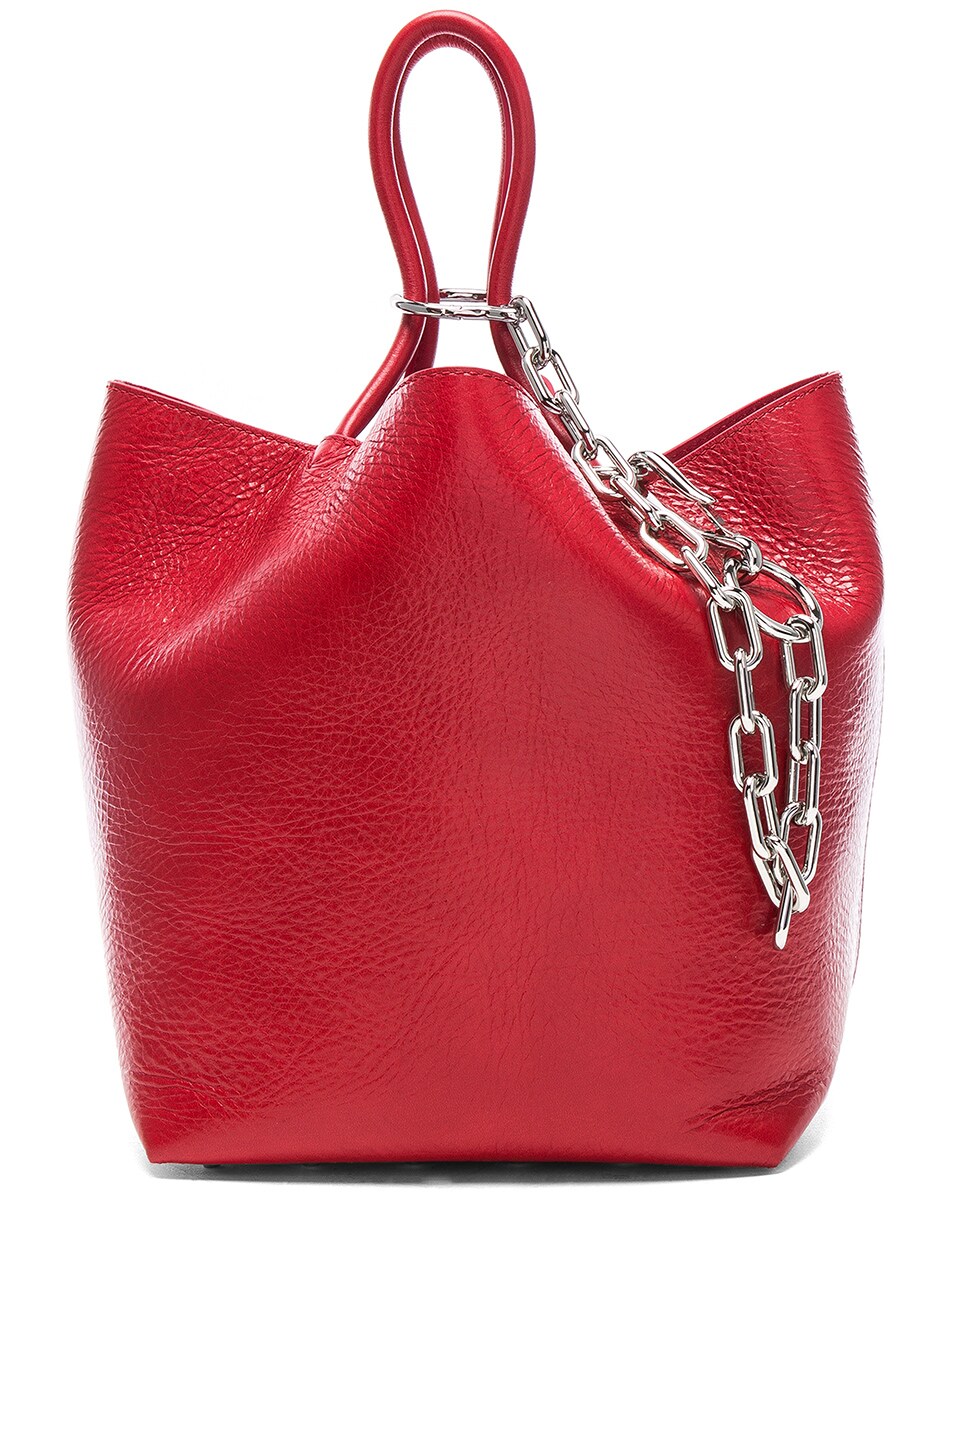 Image 1 of Alexander Wang Roxy Small Tote in Lipstick